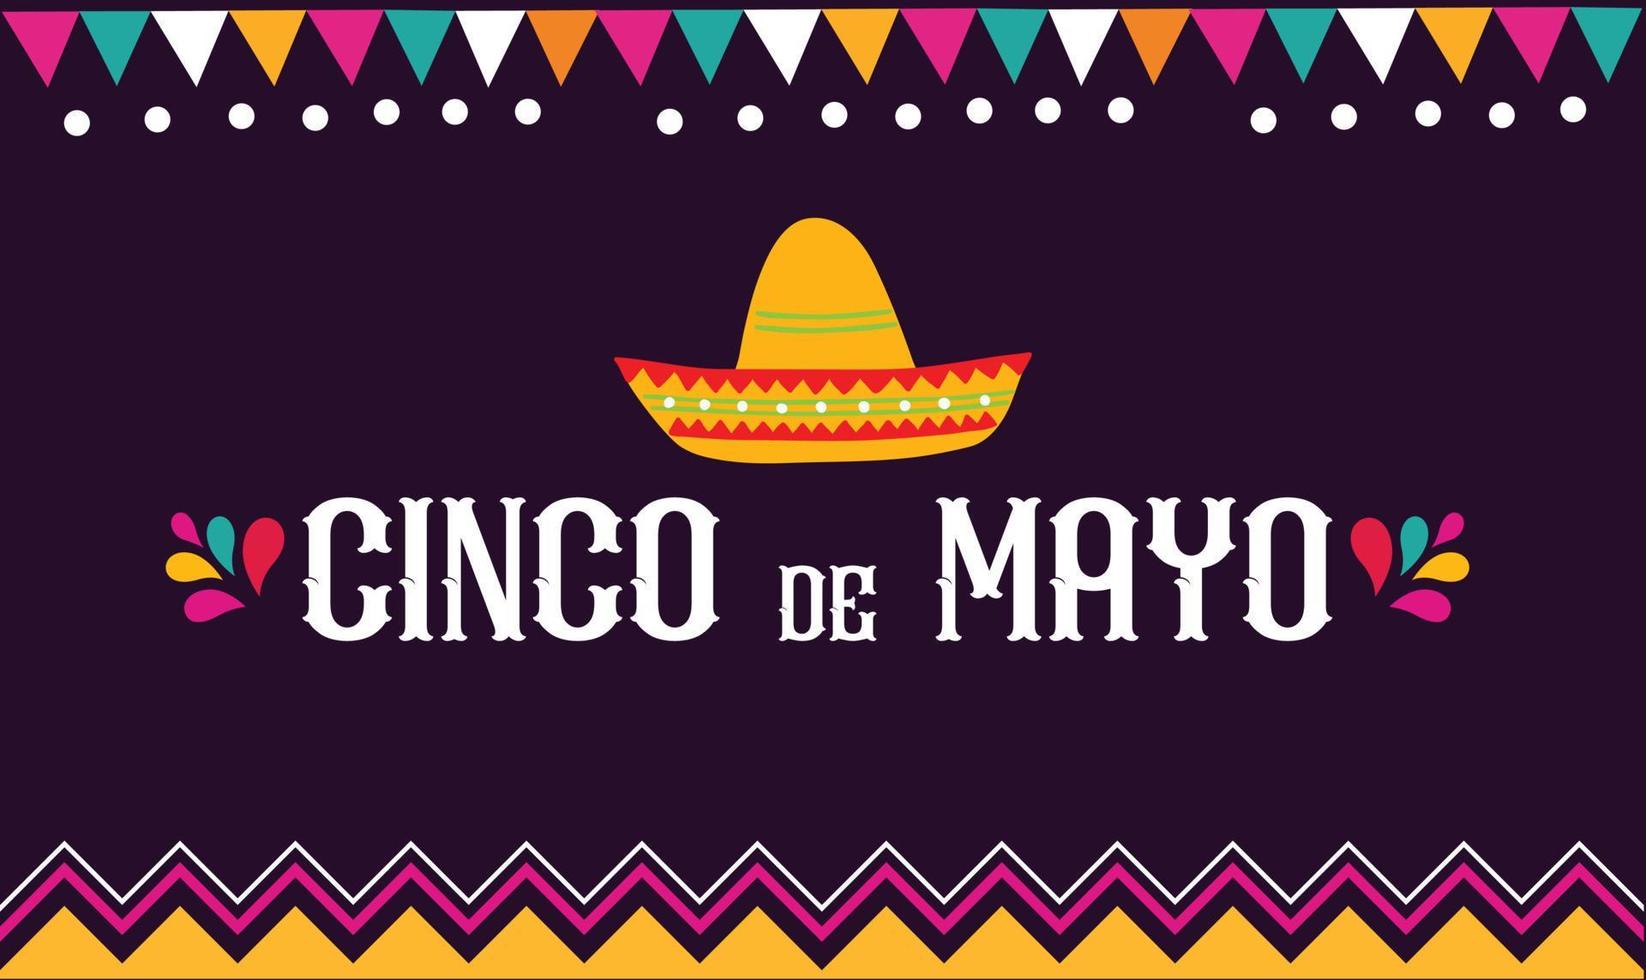 Cinco de Mayo - May 5, a federal holiday in Mexico banner template for Mexico independence celebration background. Fiesta banner and poster design with flags, flowers, and decorations. vector